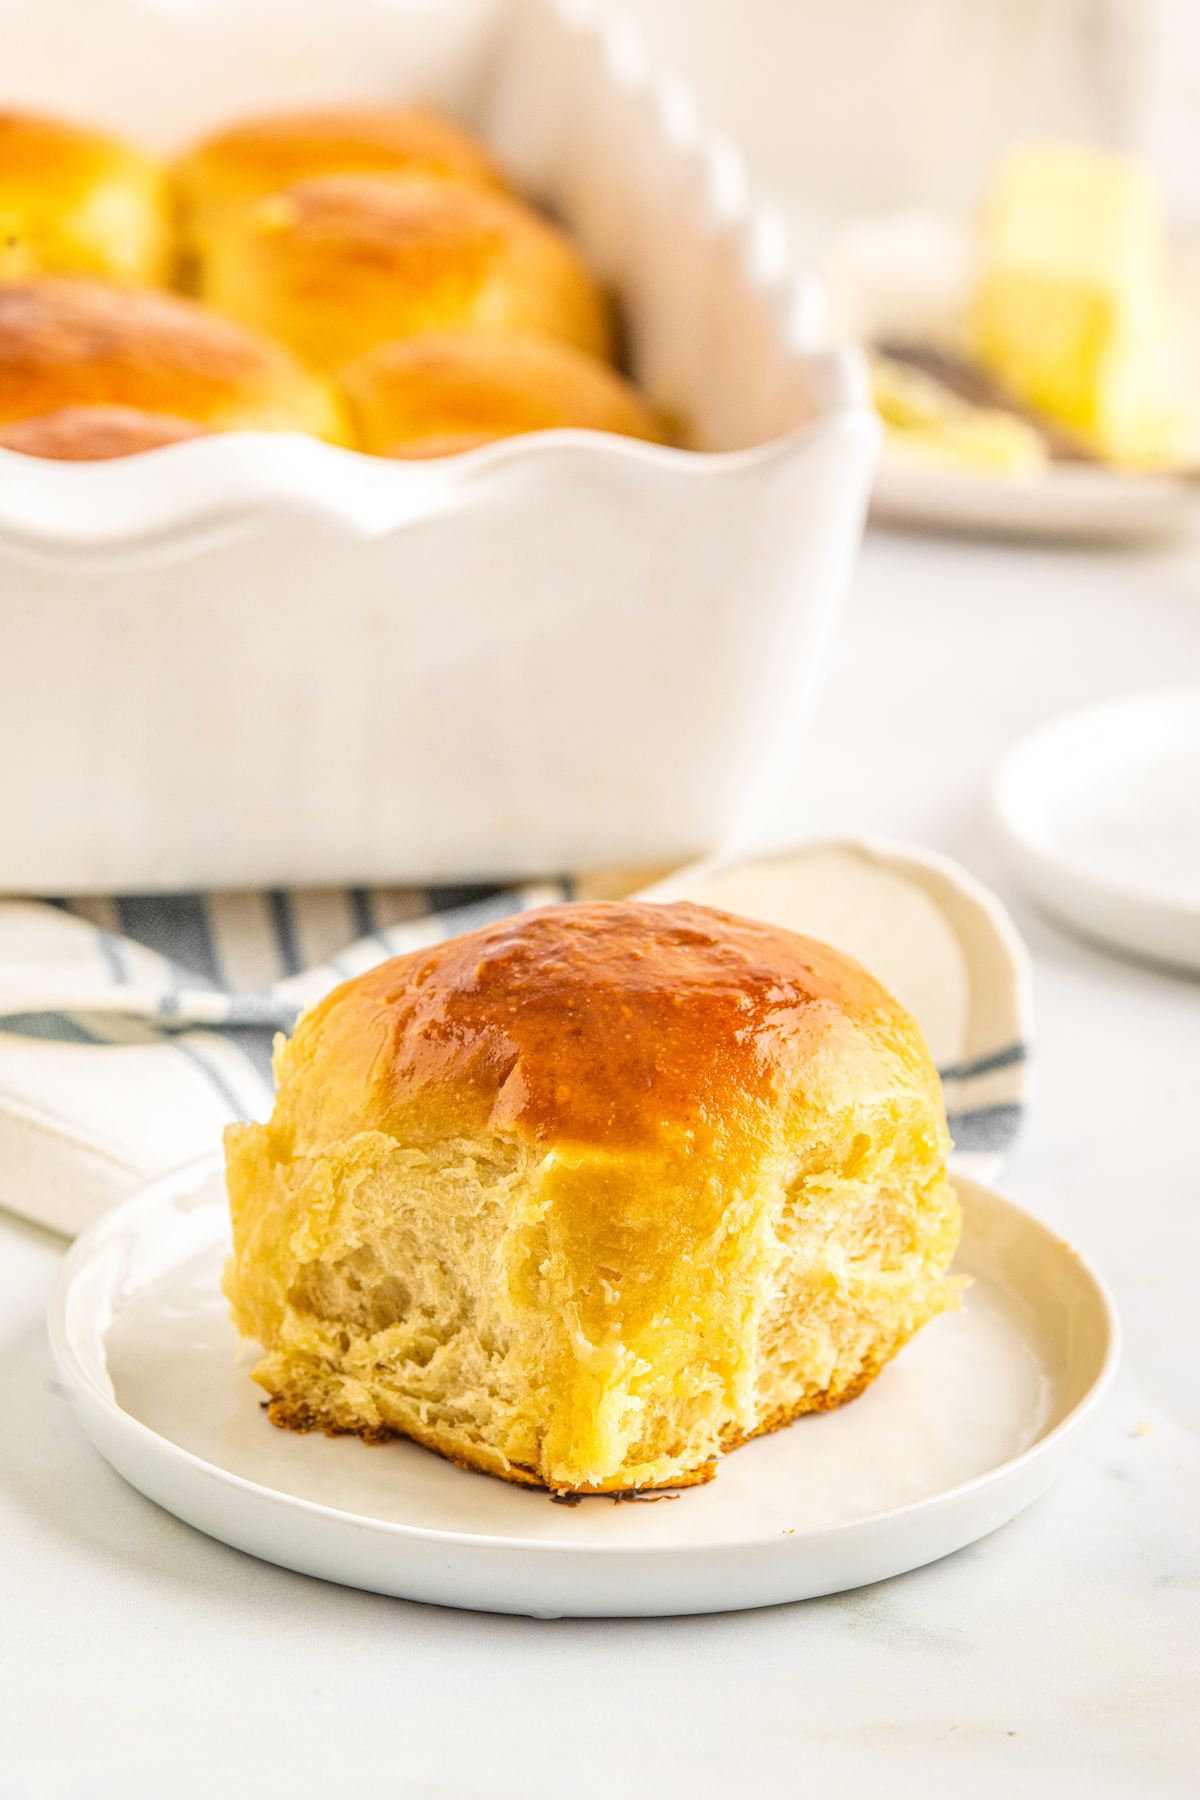 A dinner roll on a small white plate, with the pan of rolls and a dish of butter in the background of the shot.